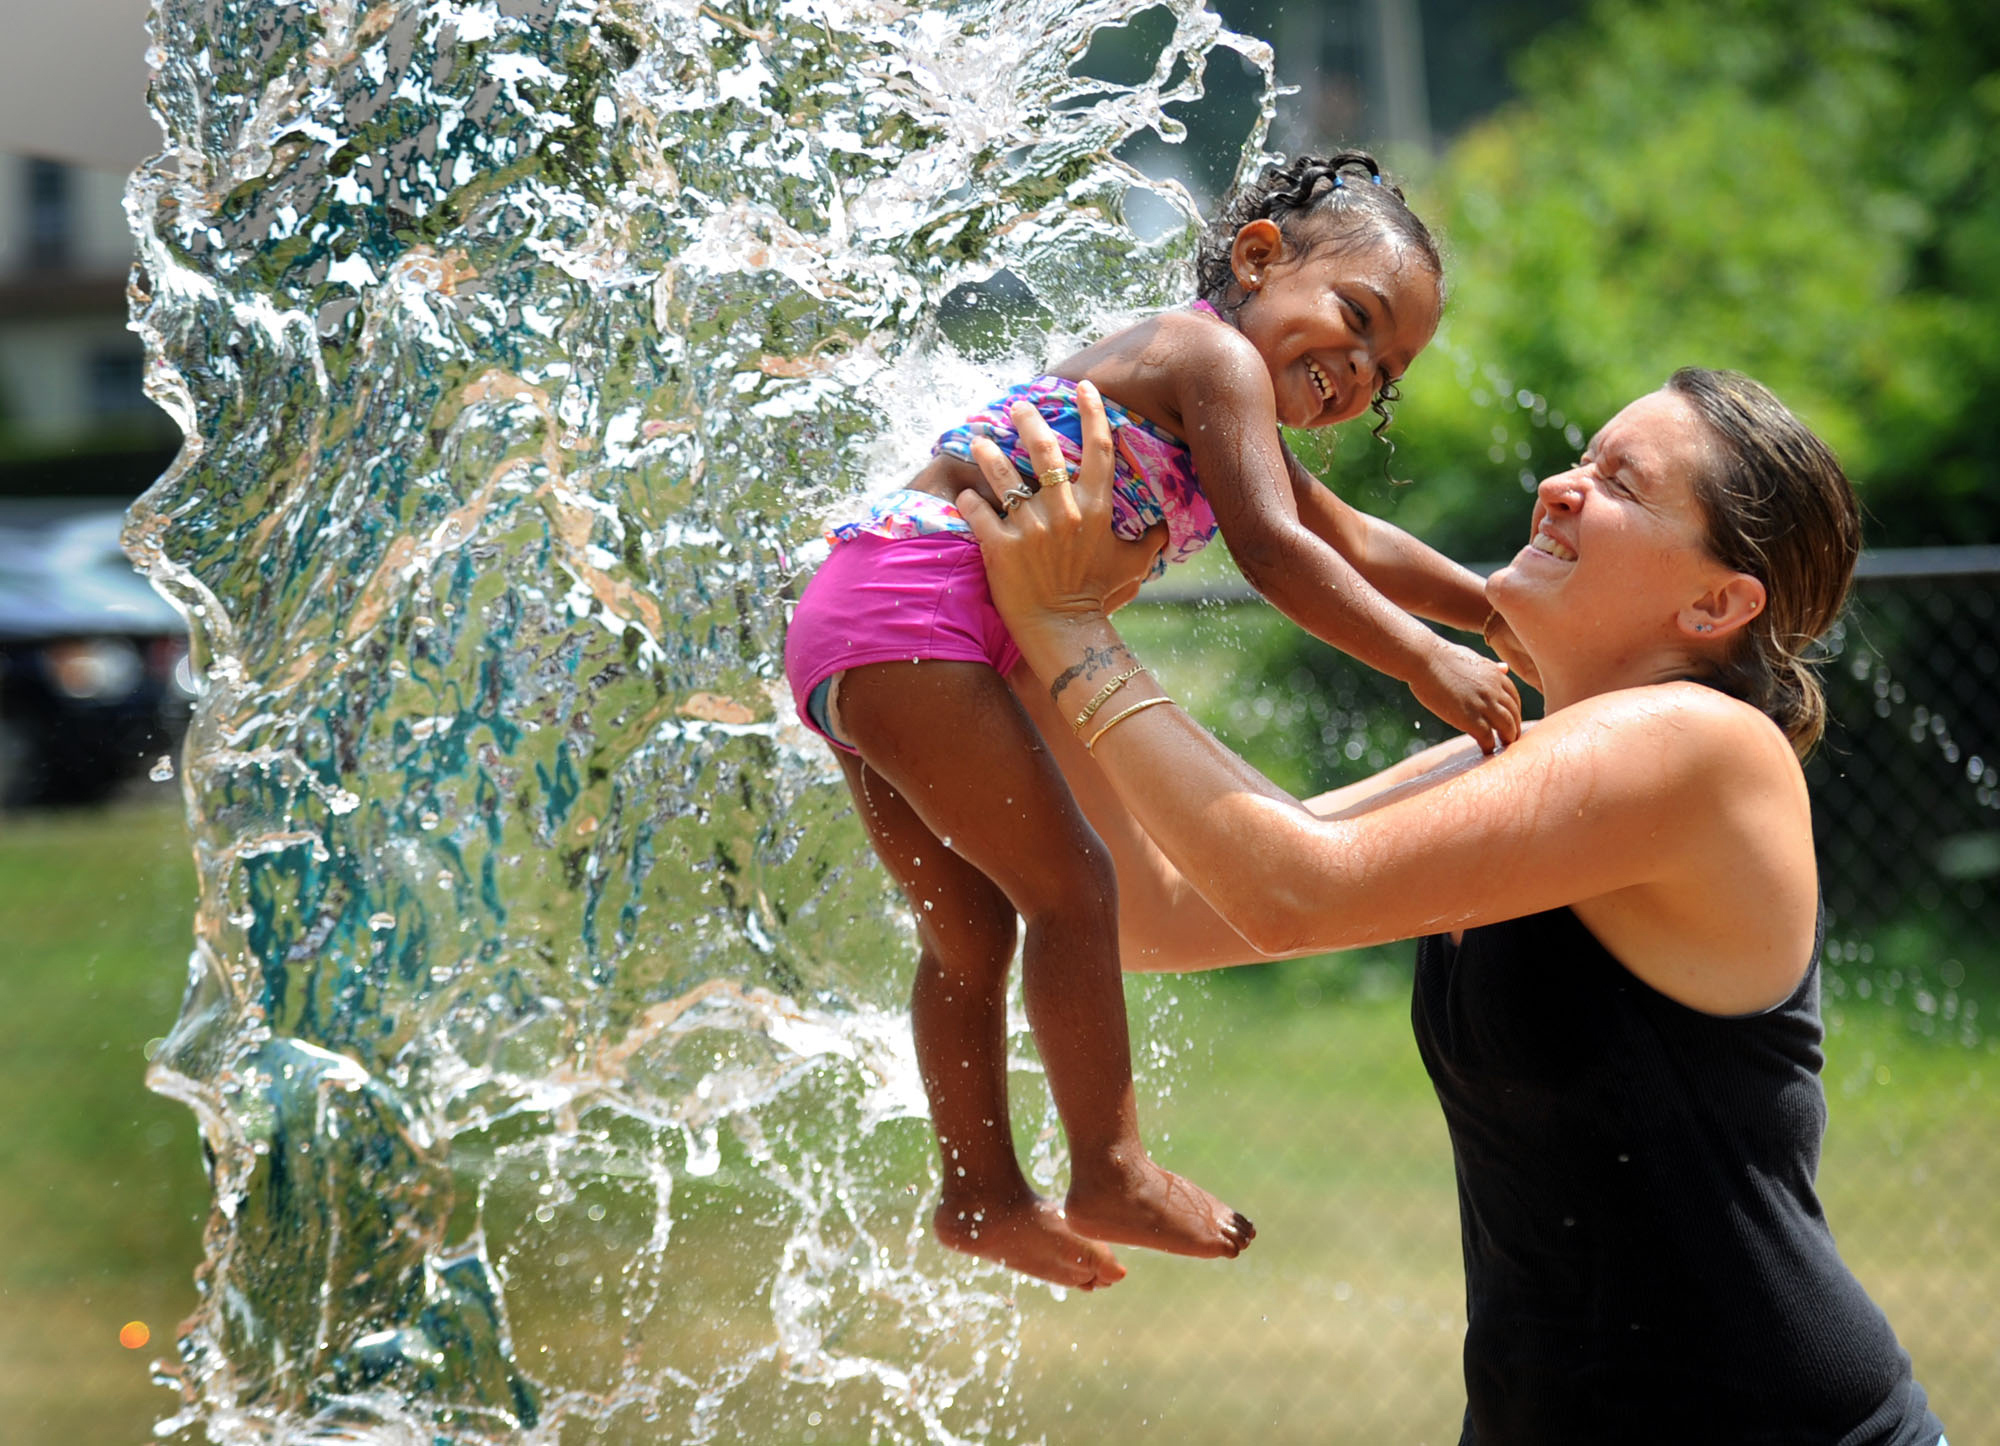 Beating a Summer heatwave, a mother lifts her daughter into the cascading water at a local splash park. 